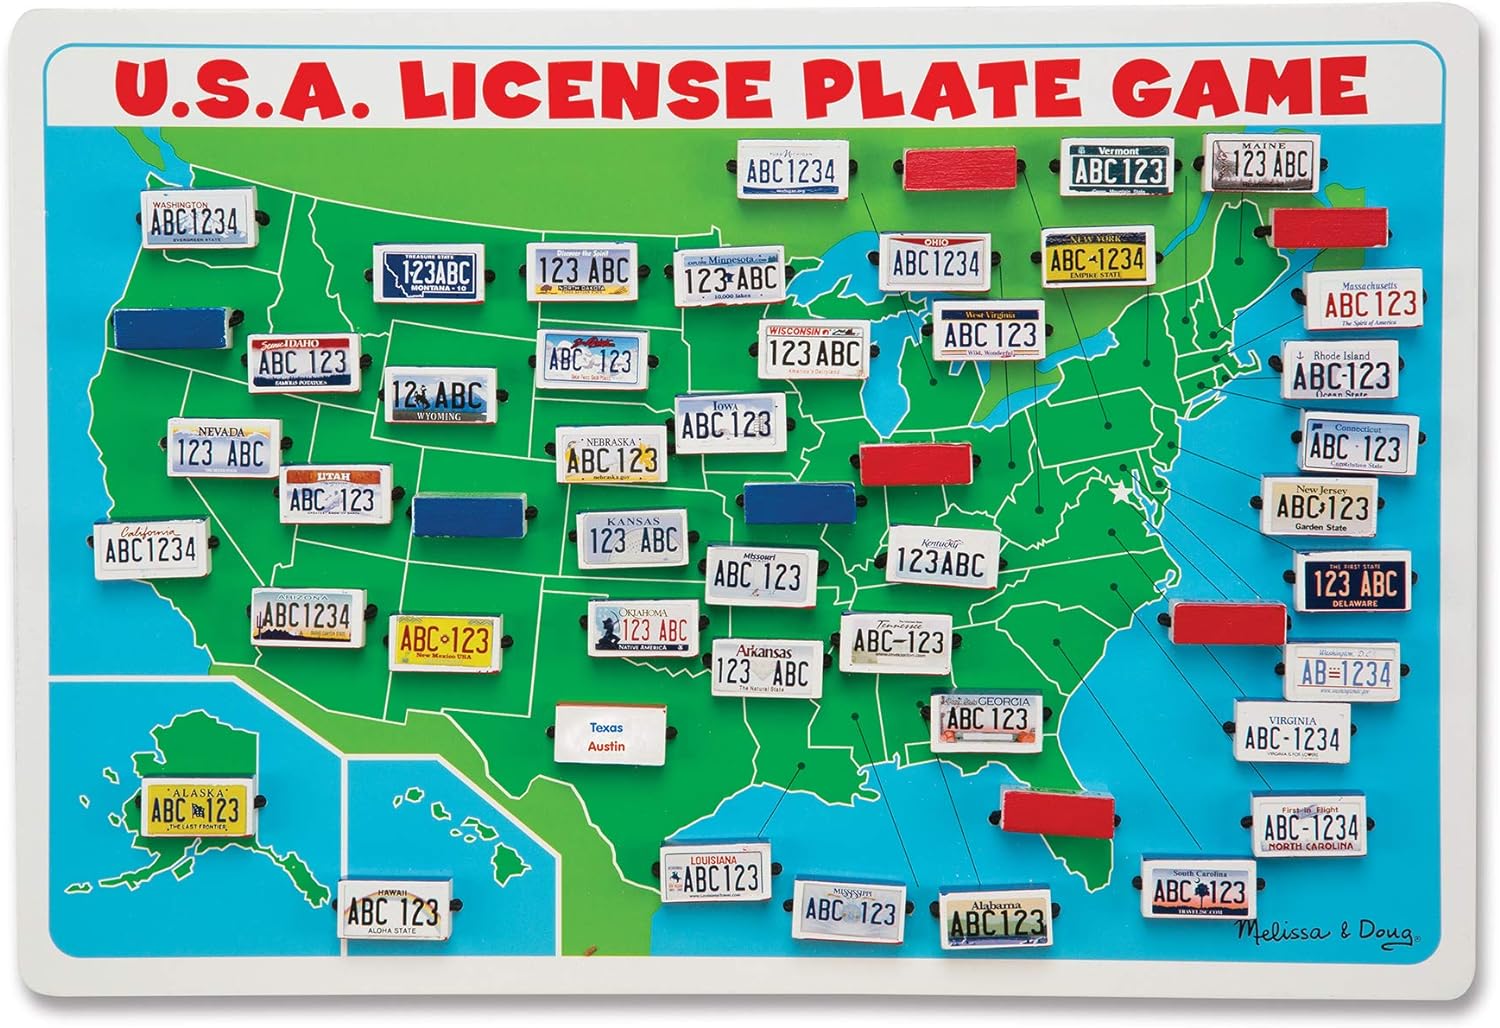 Melissa & Doug Flip to Win Travel License Plate Game - Wooden U.S. Map Game Board - image 1 of 2